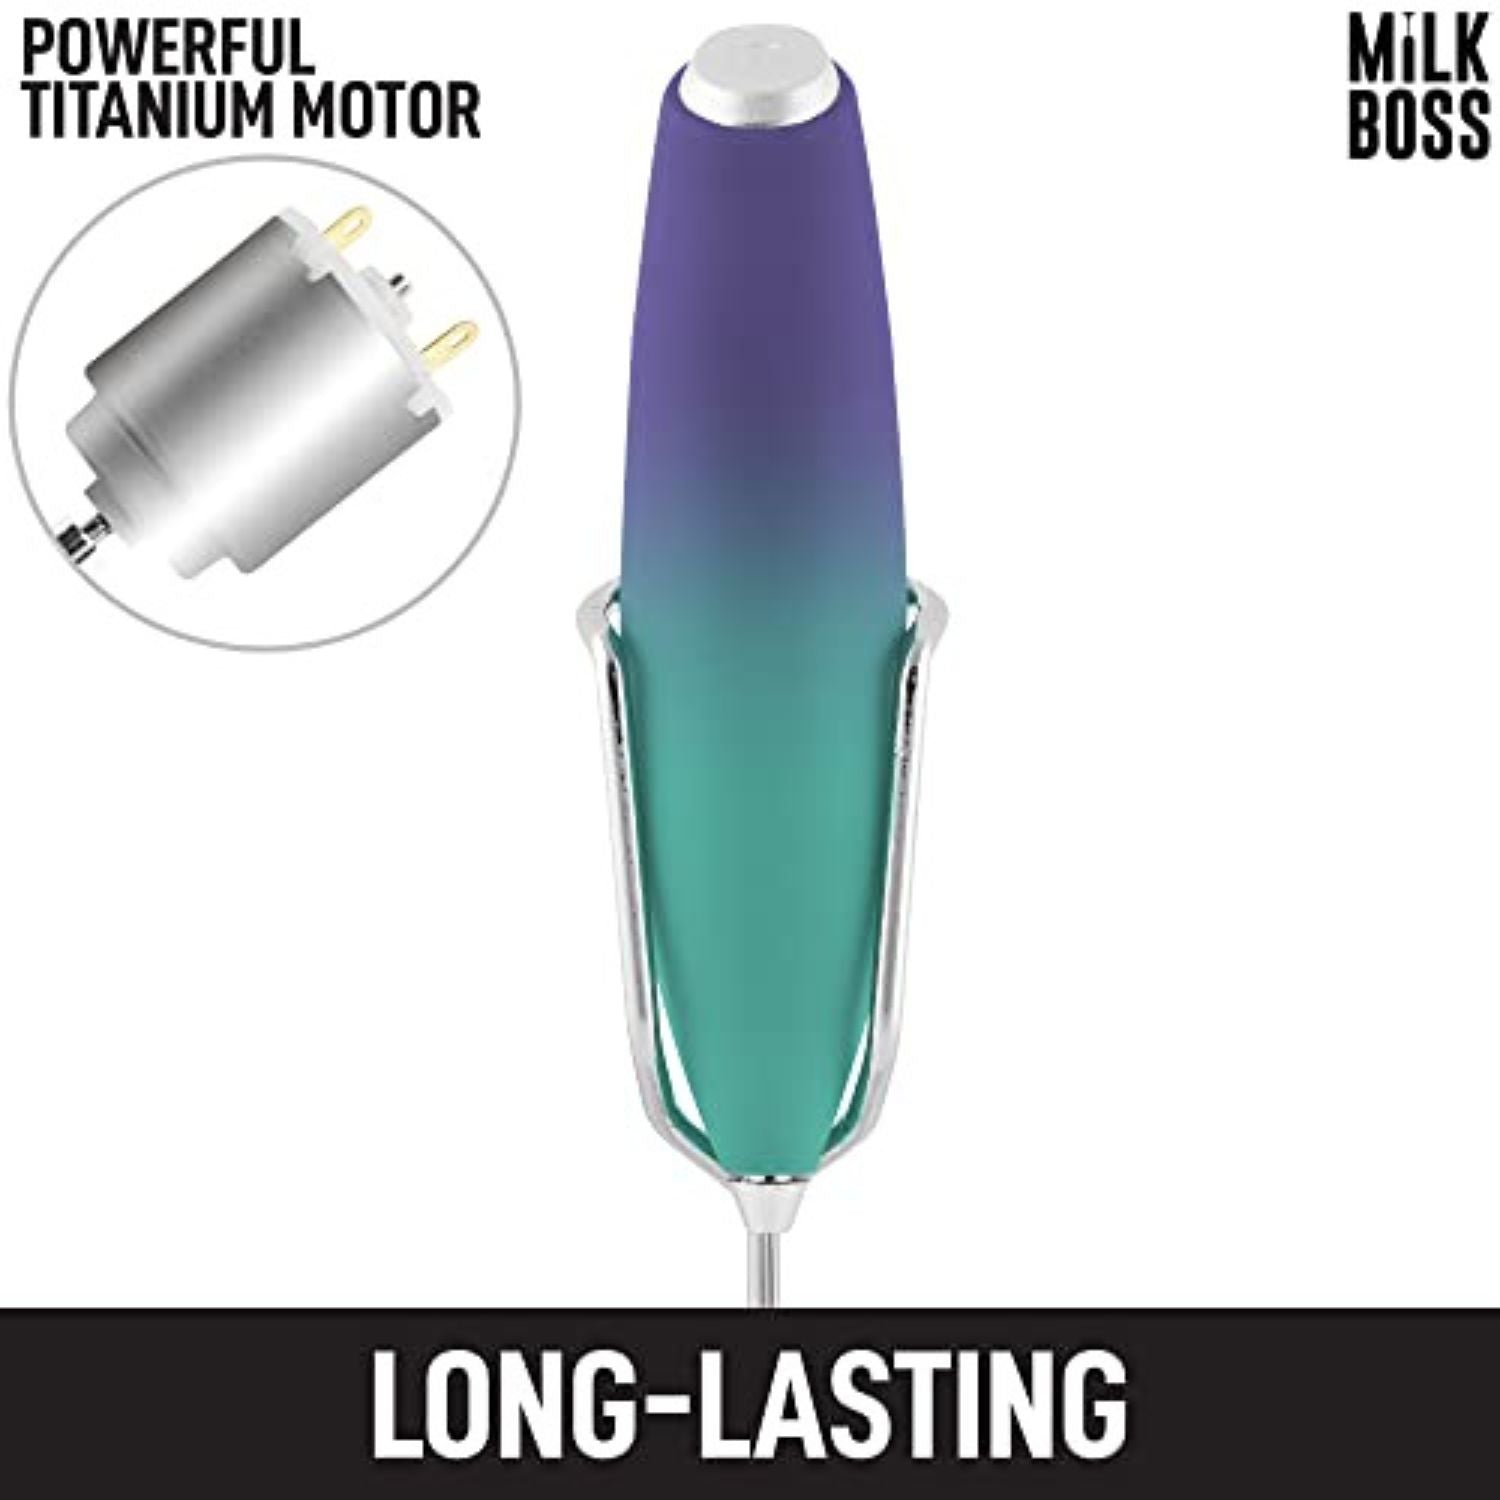 milk frother with powerful titanium motor